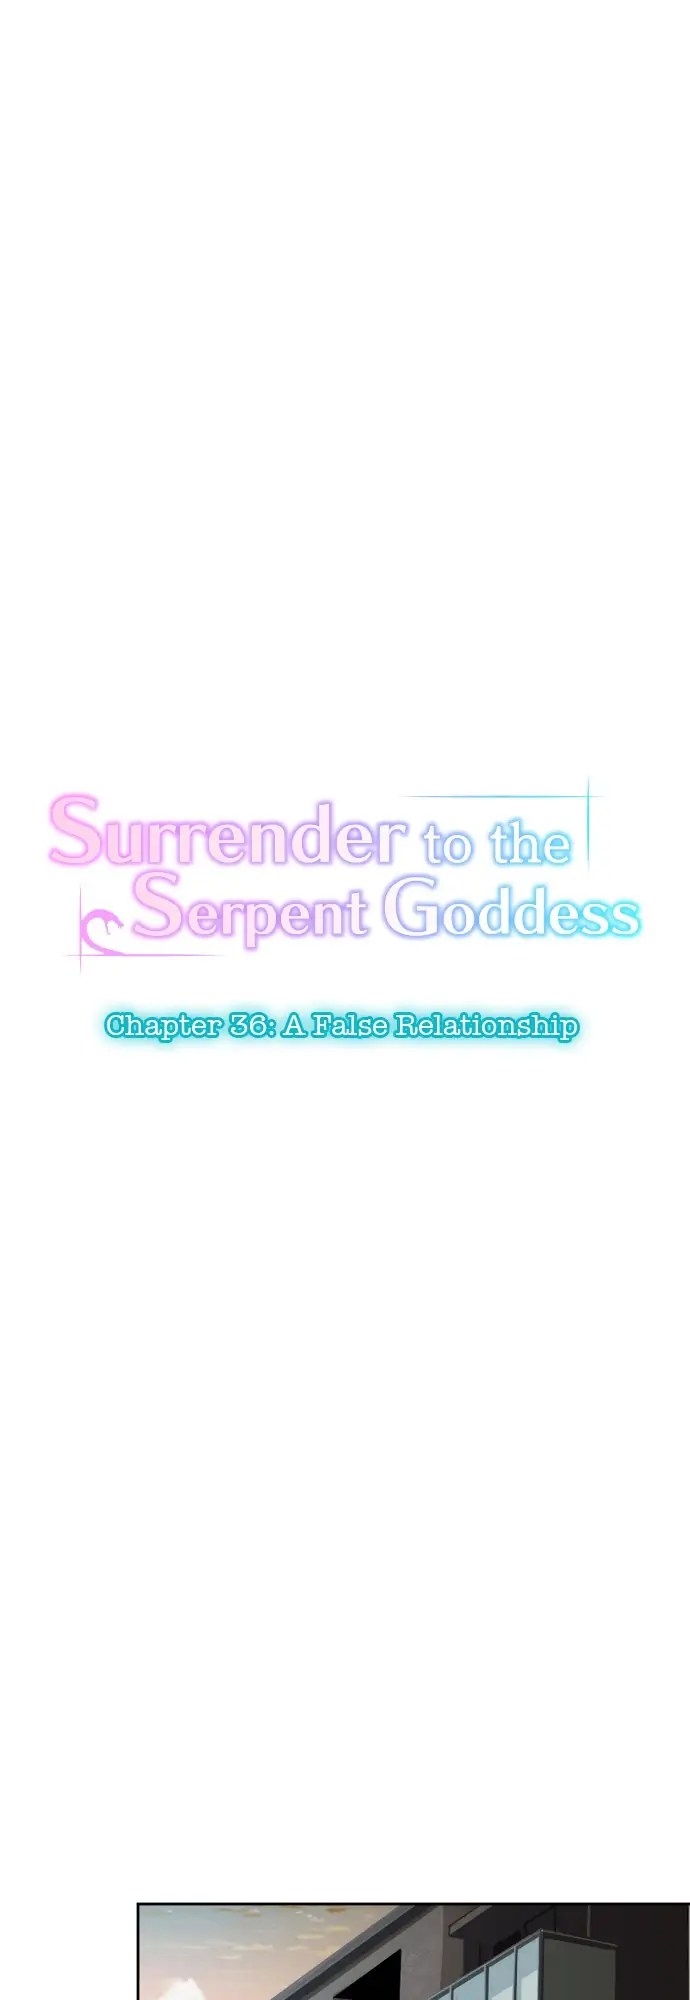 Surrender To The Serpent Goddess - Page 2